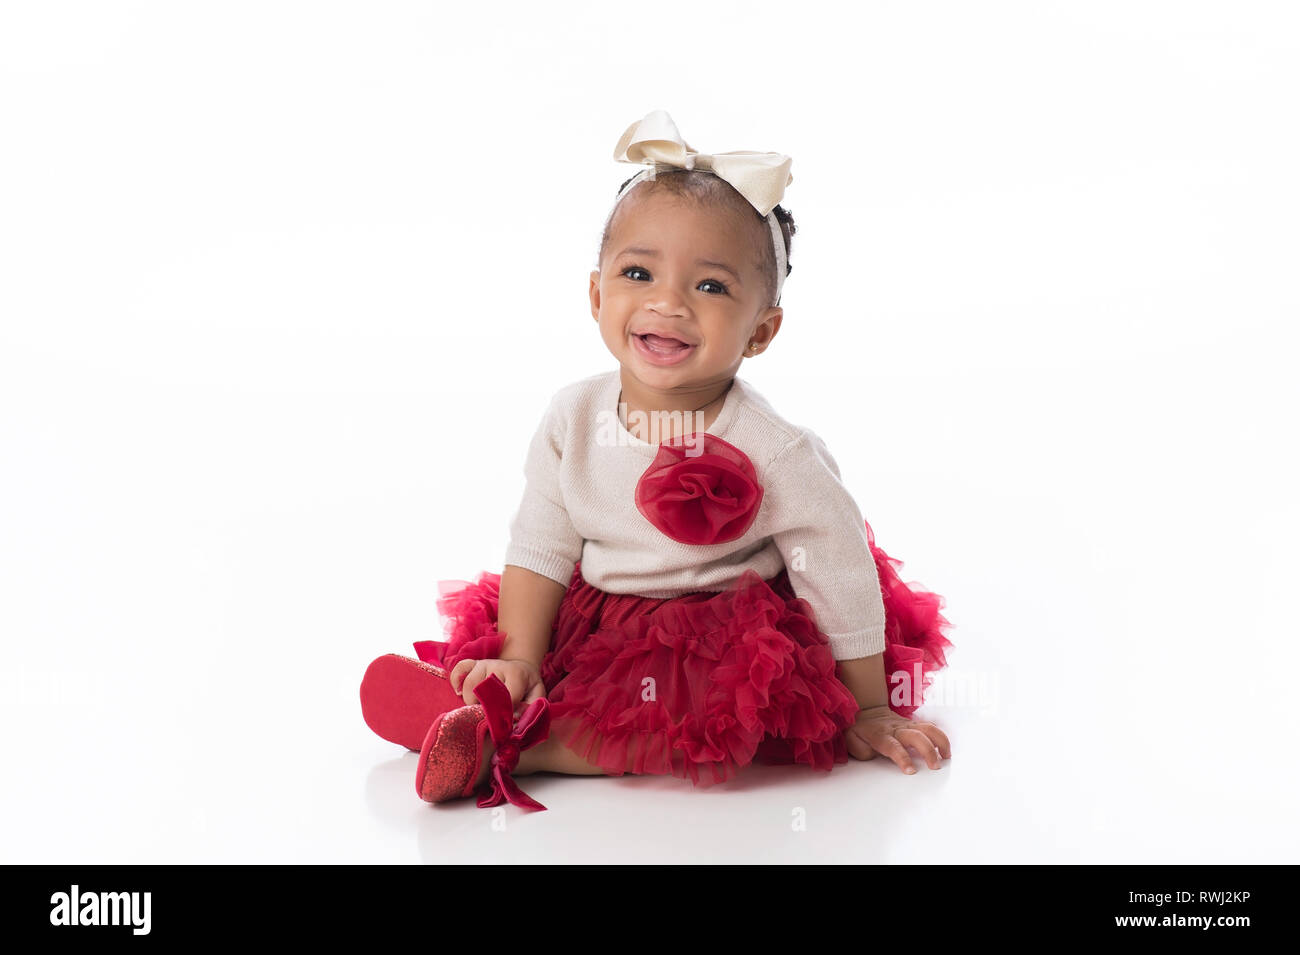 A smiling six month old baby girl wearing a red tutu. She is sitting on a white, seamless background. Stock Photo